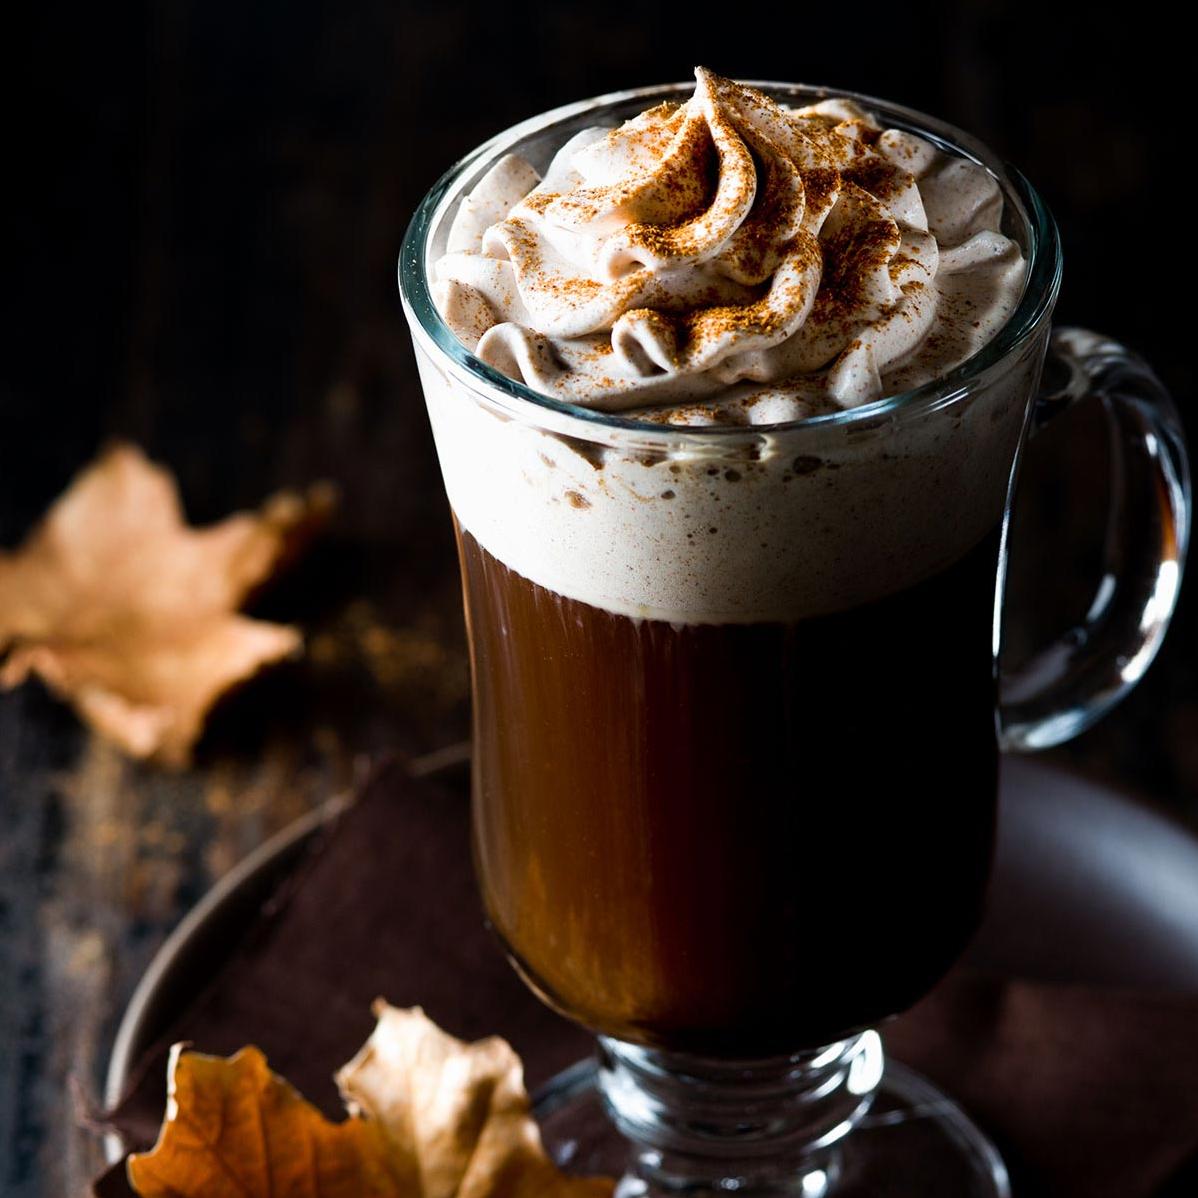  The perfect coffee recipe for cold winter nights by the fireplace